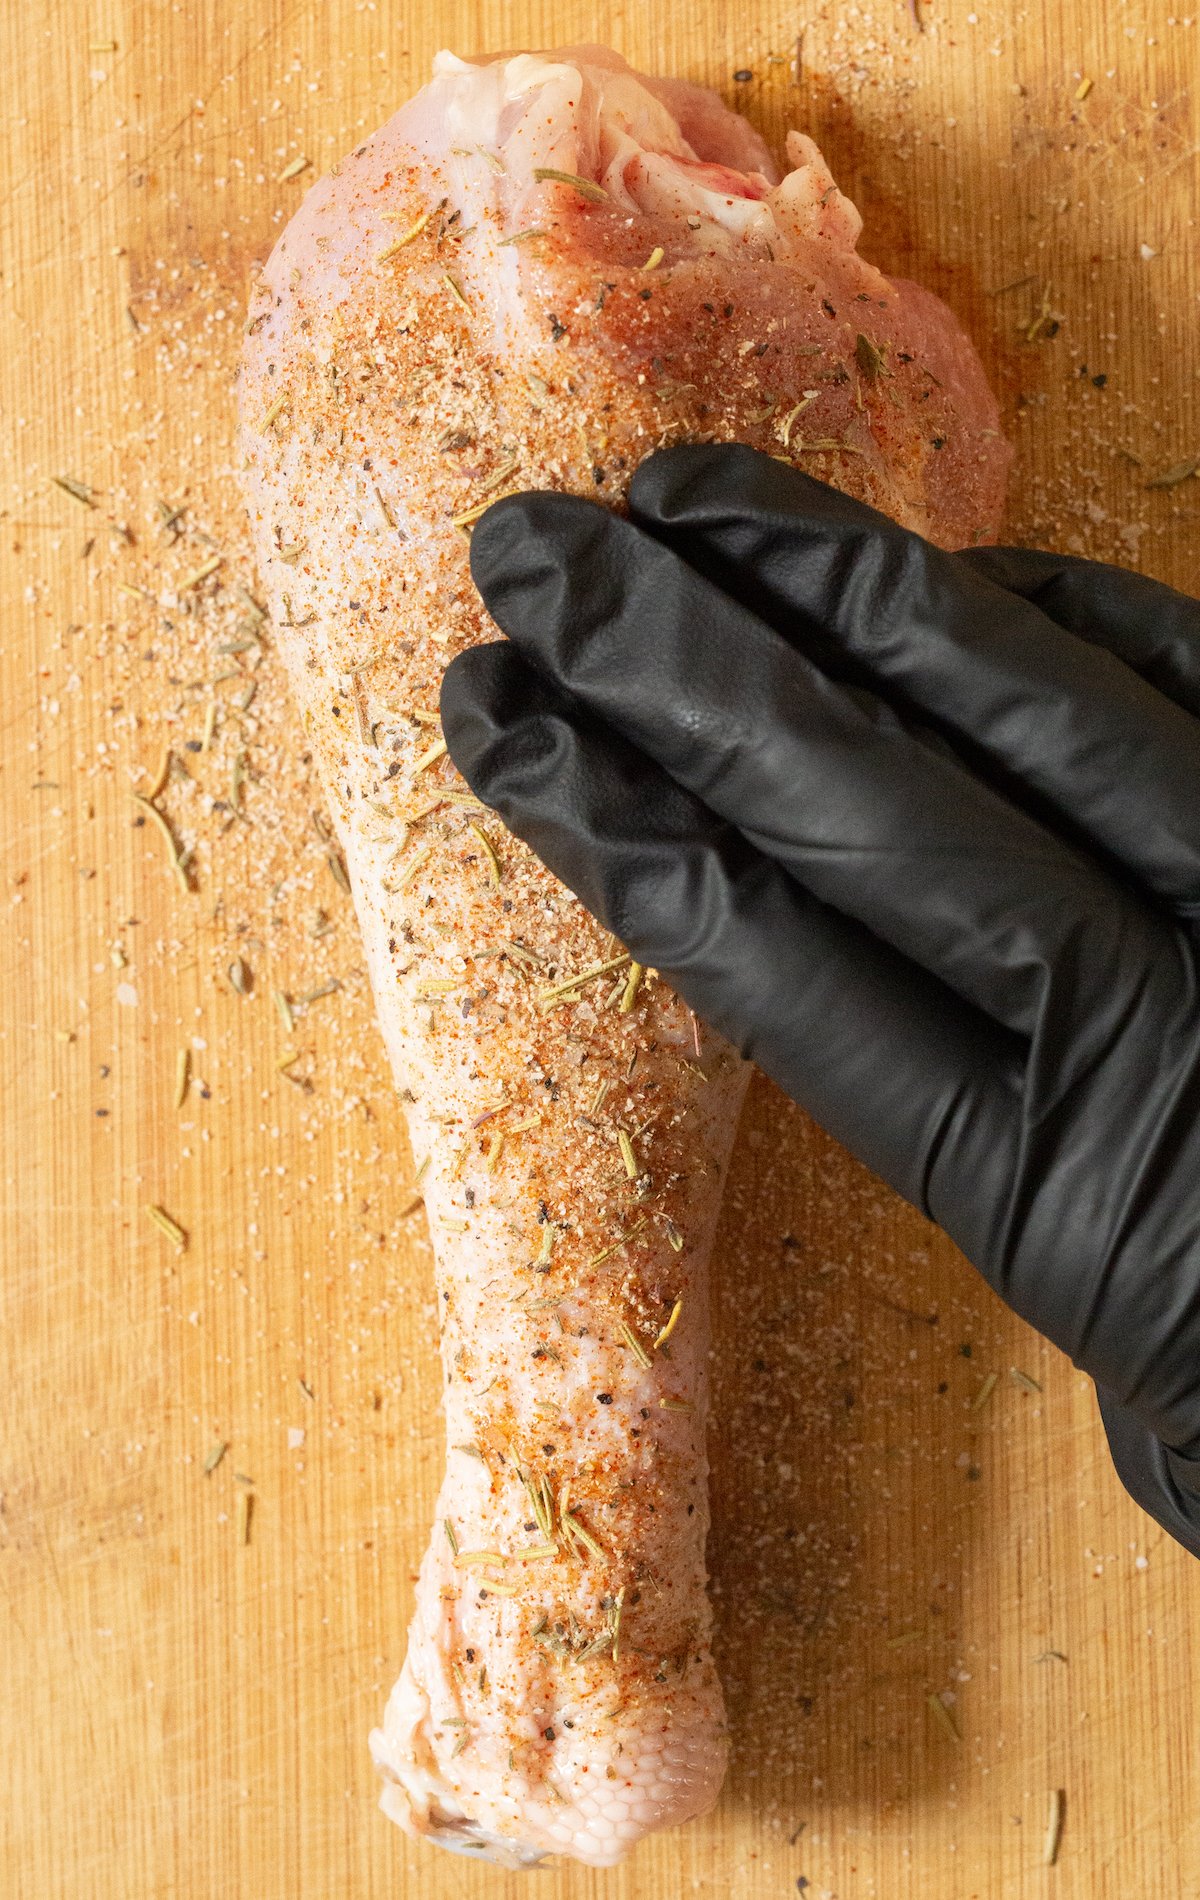 A raw turkey leg covered in seasoning that's being rubbed in by a gloved hand.